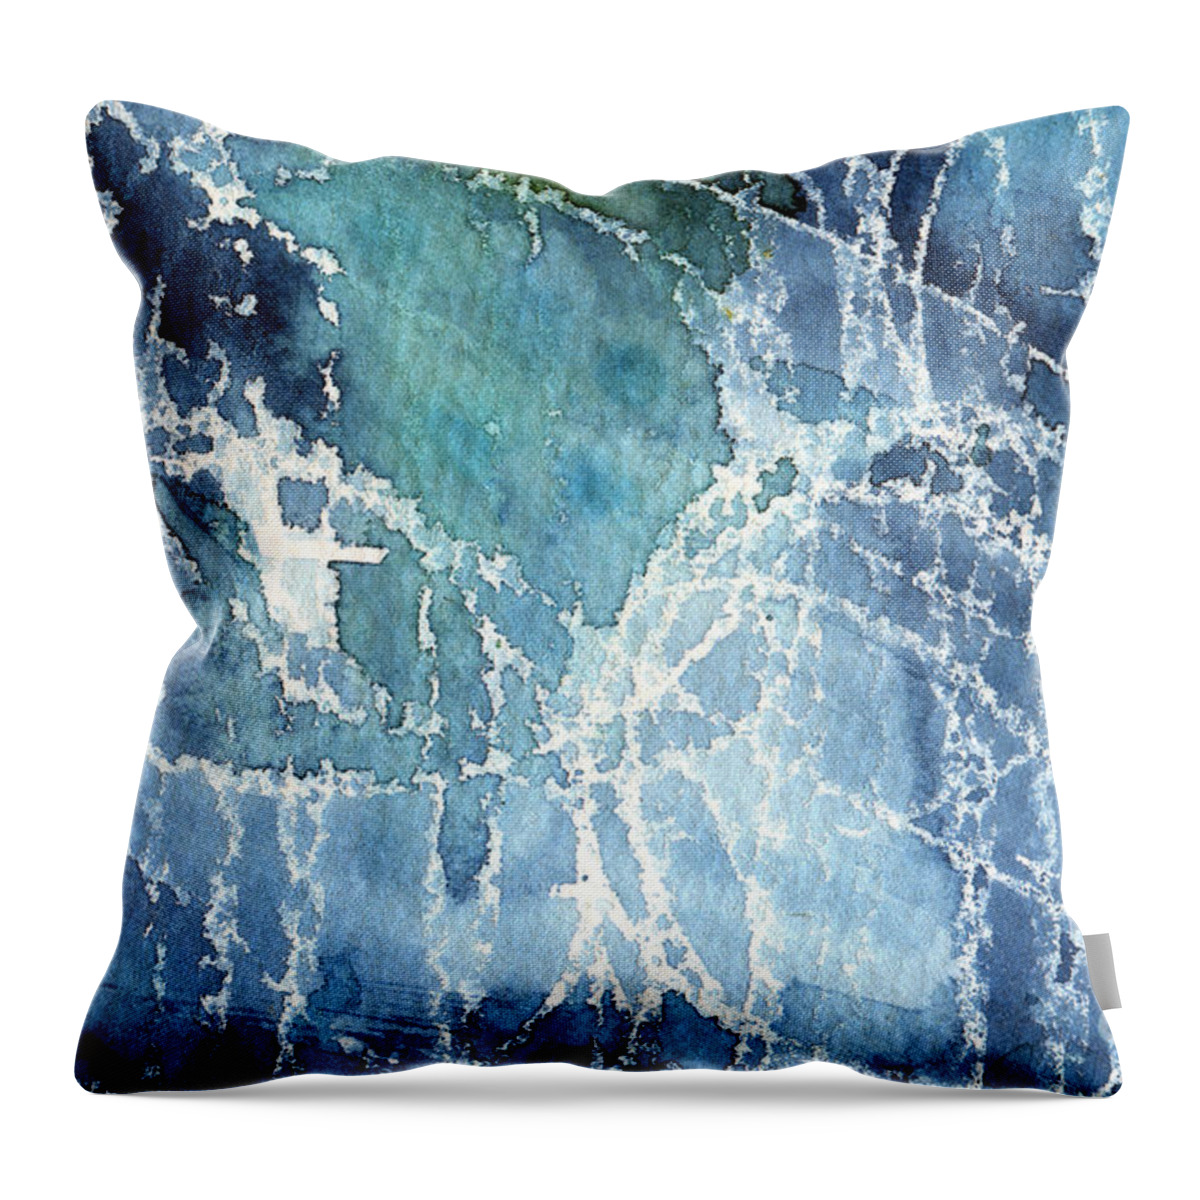 Abstract Painting Throw Pillow featuring the painting Sea Spray by Linda Woods